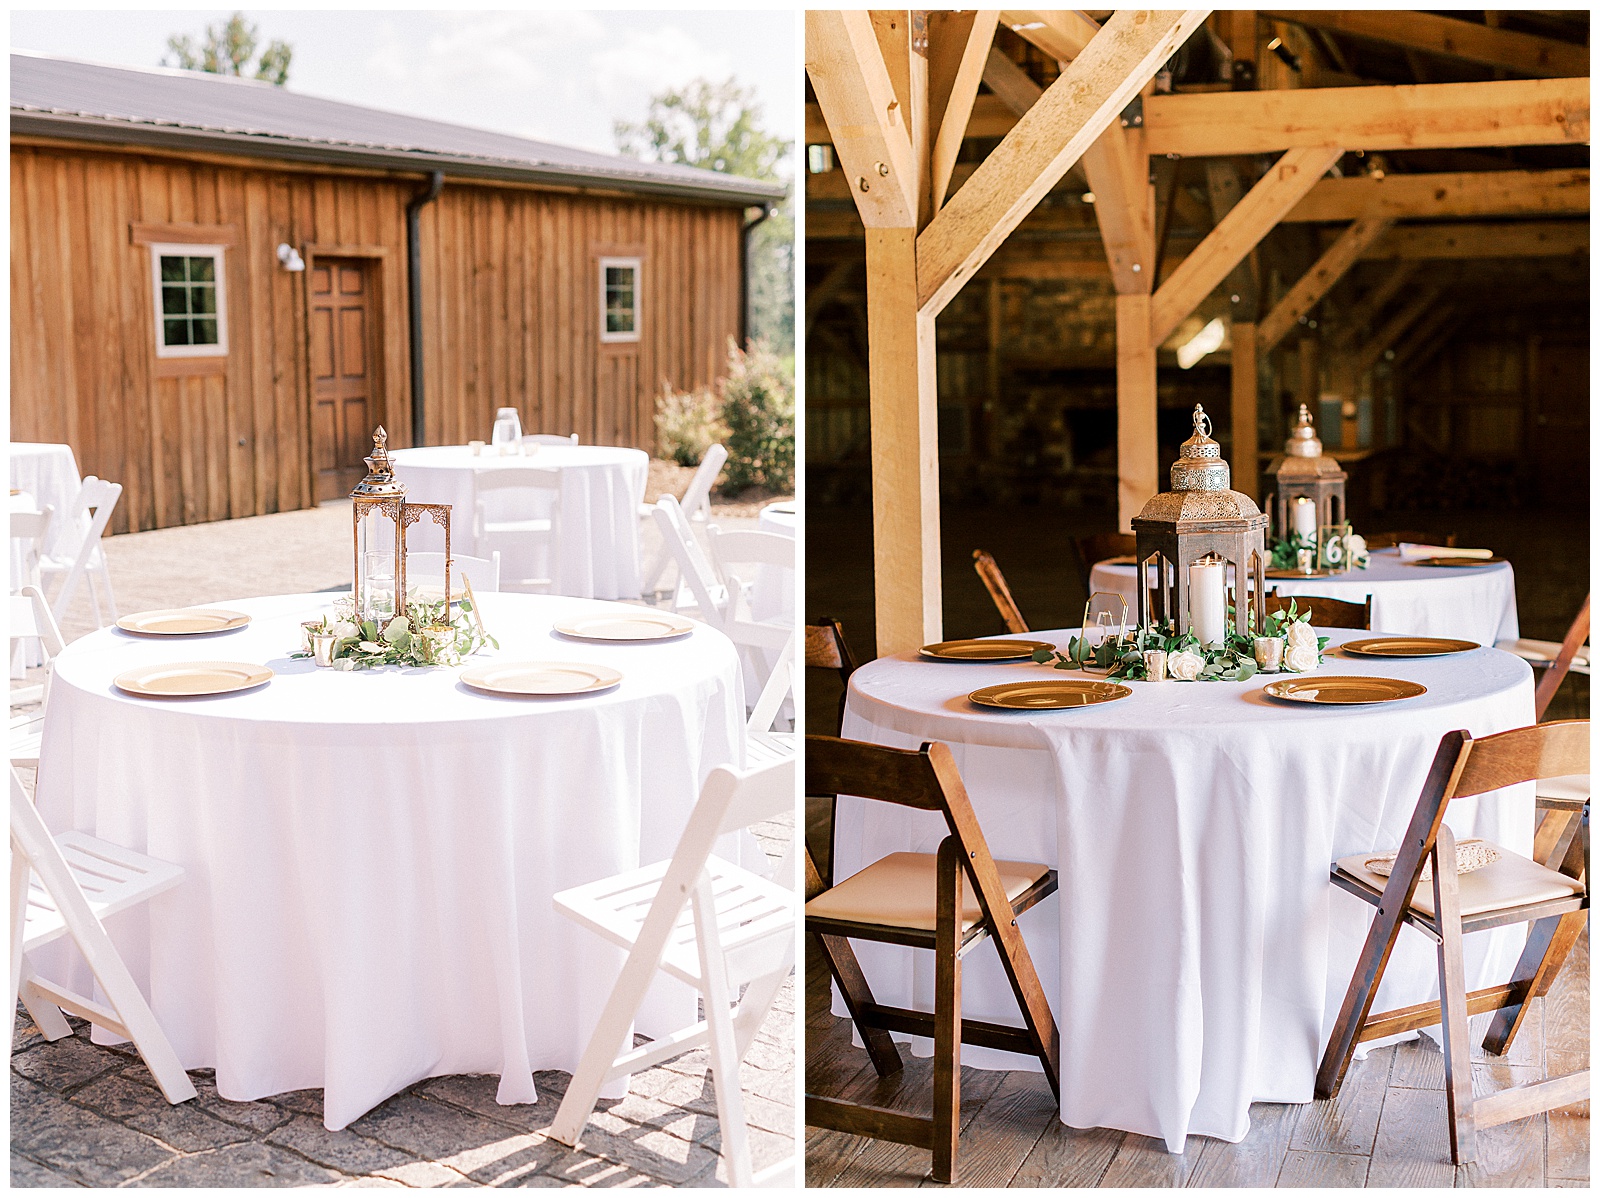 wedding day reception tables with white tablecloths and minimalist lantern centerpiece at wooden barn venue location outdoor indoor